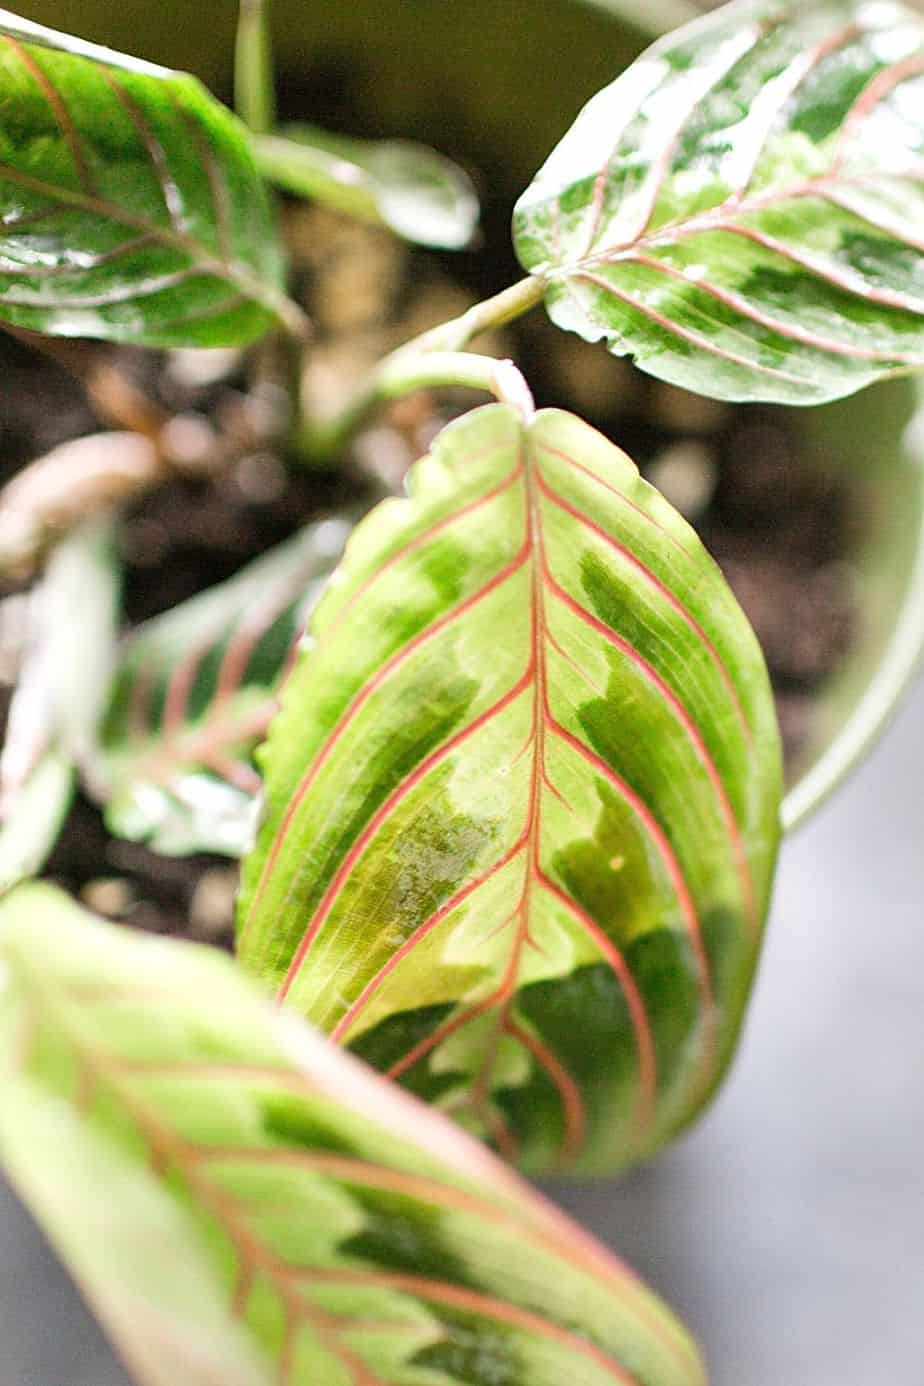 Prayer Plants are slow-growing plants that thrive when placed by a southeast-facing window